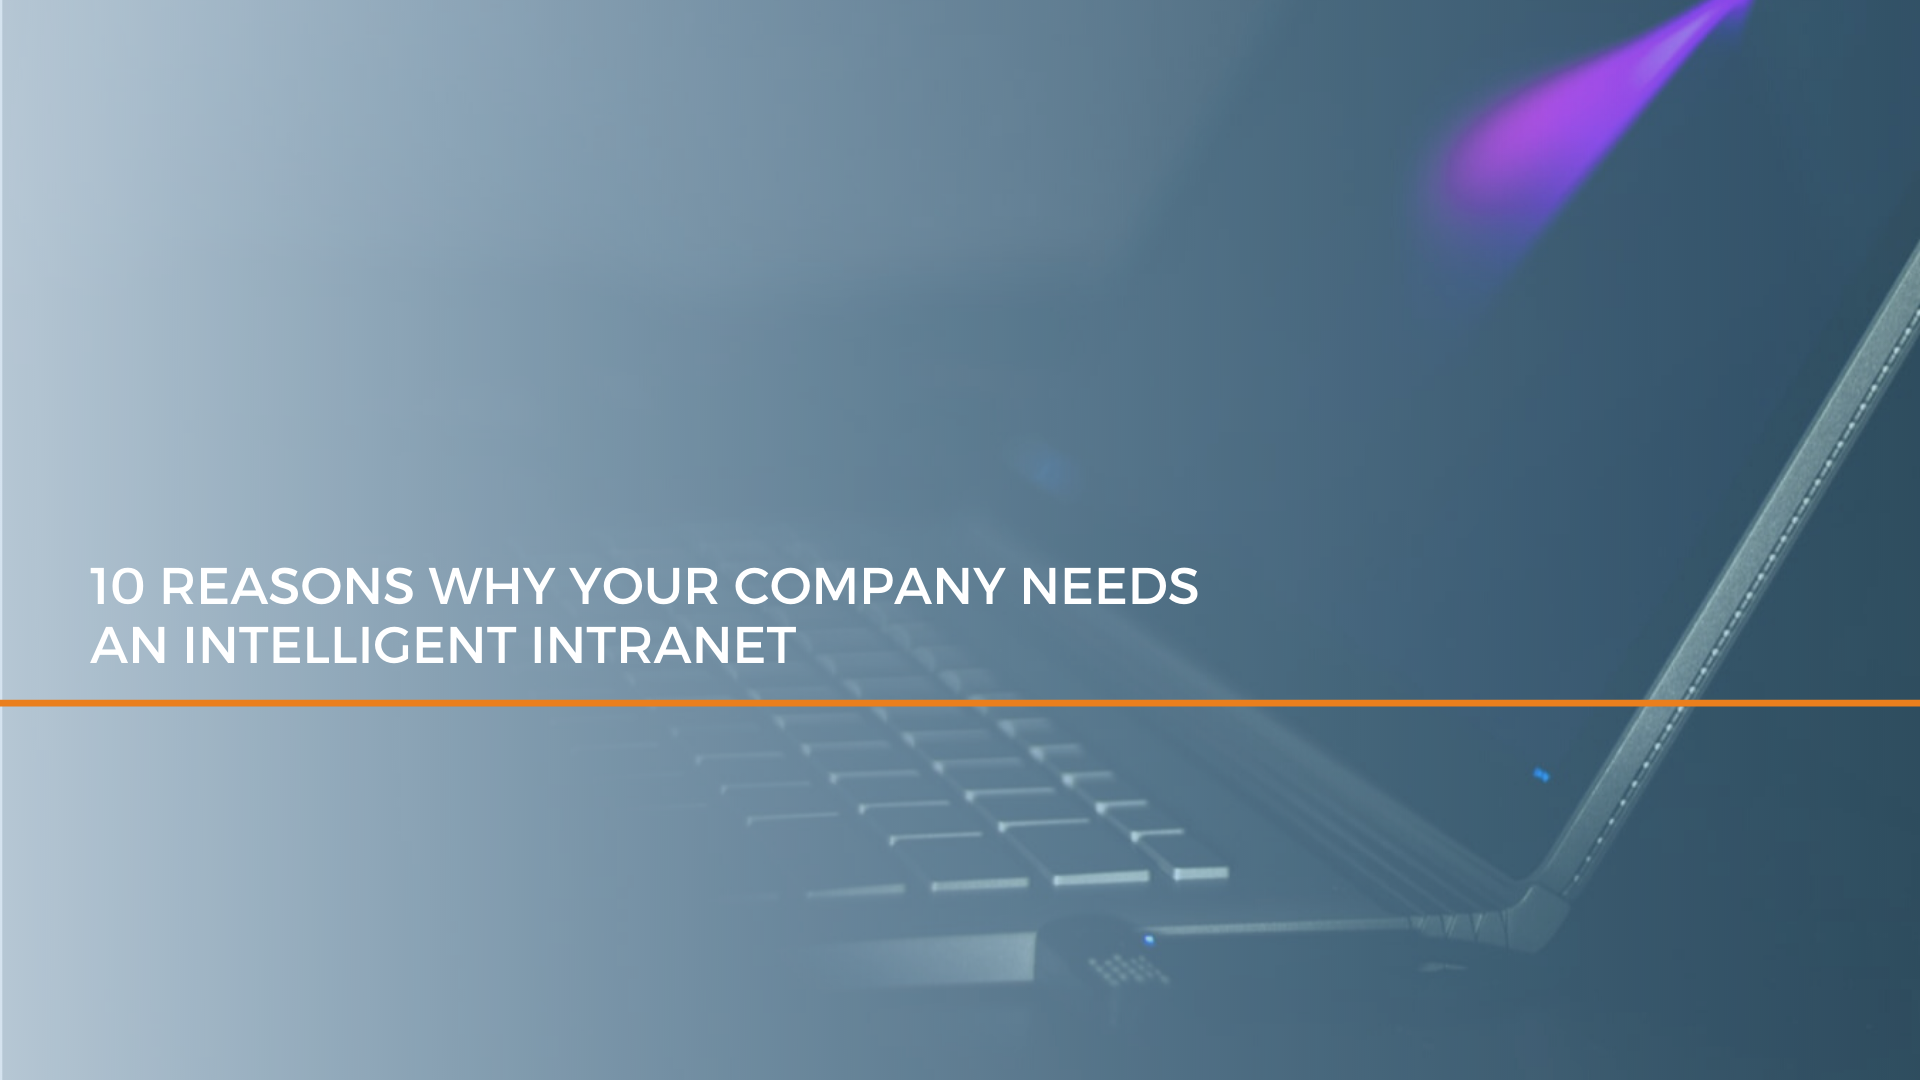 10 Reasons Why Your Company Needs An Intelligent Intranet